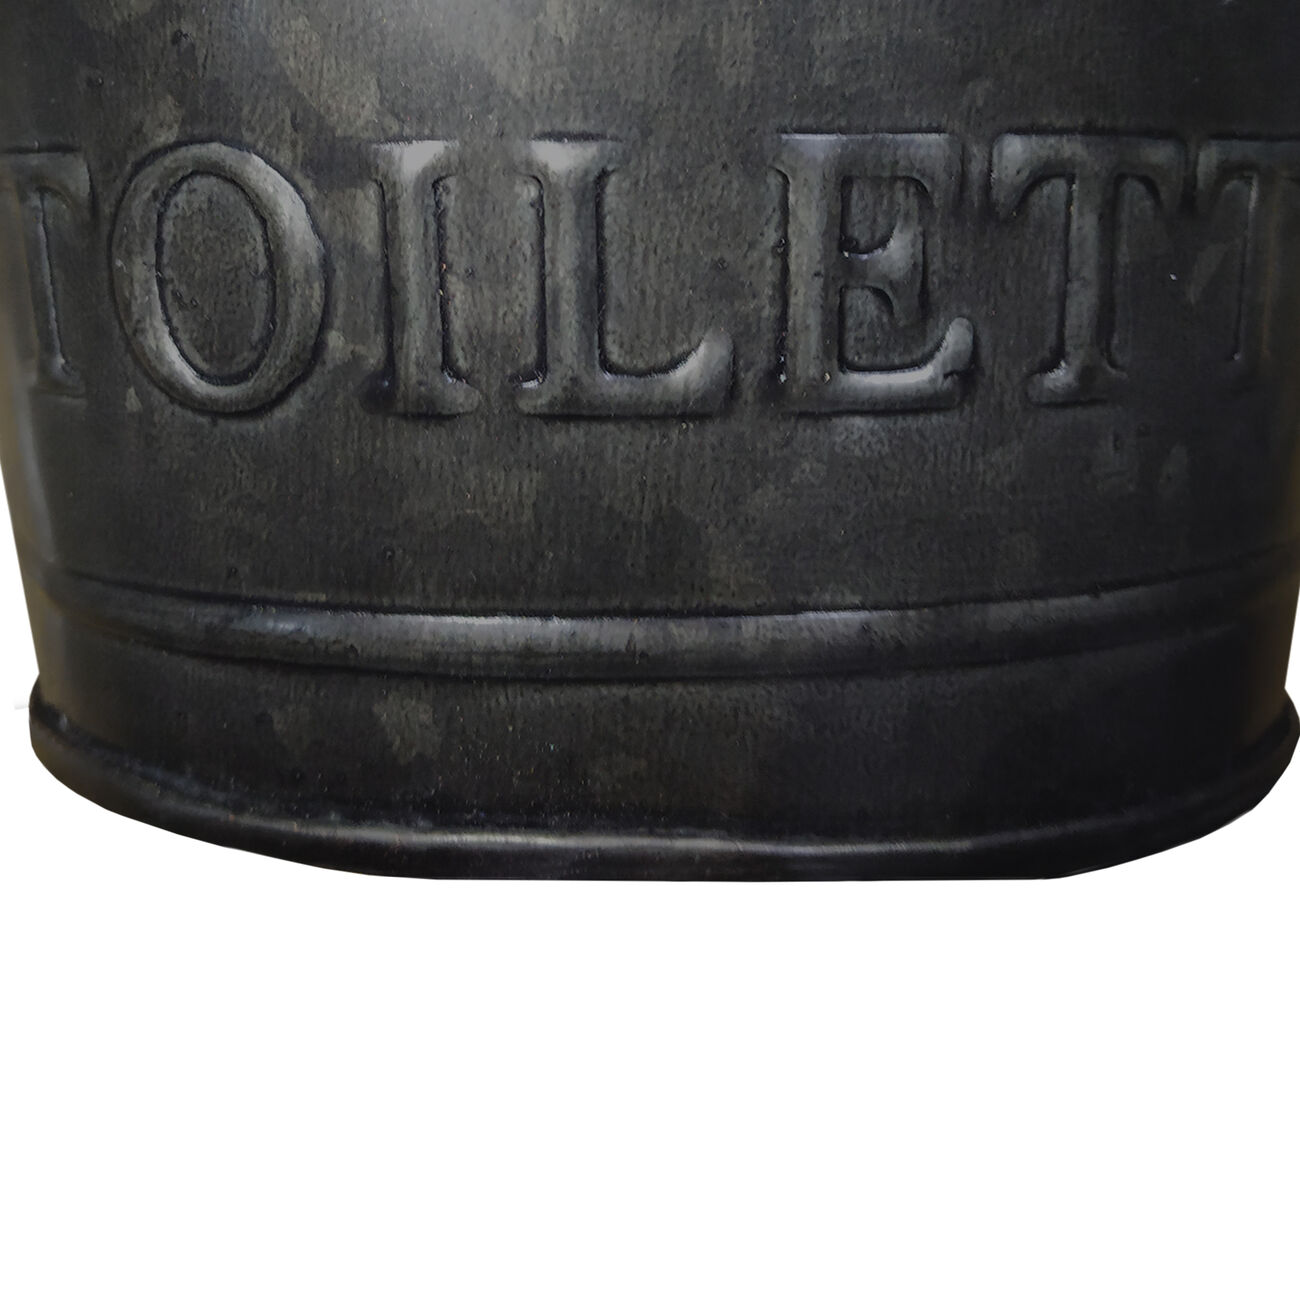 Iron Toilet Caddy With Wooden Handles And Toilette Front, Dark Gray